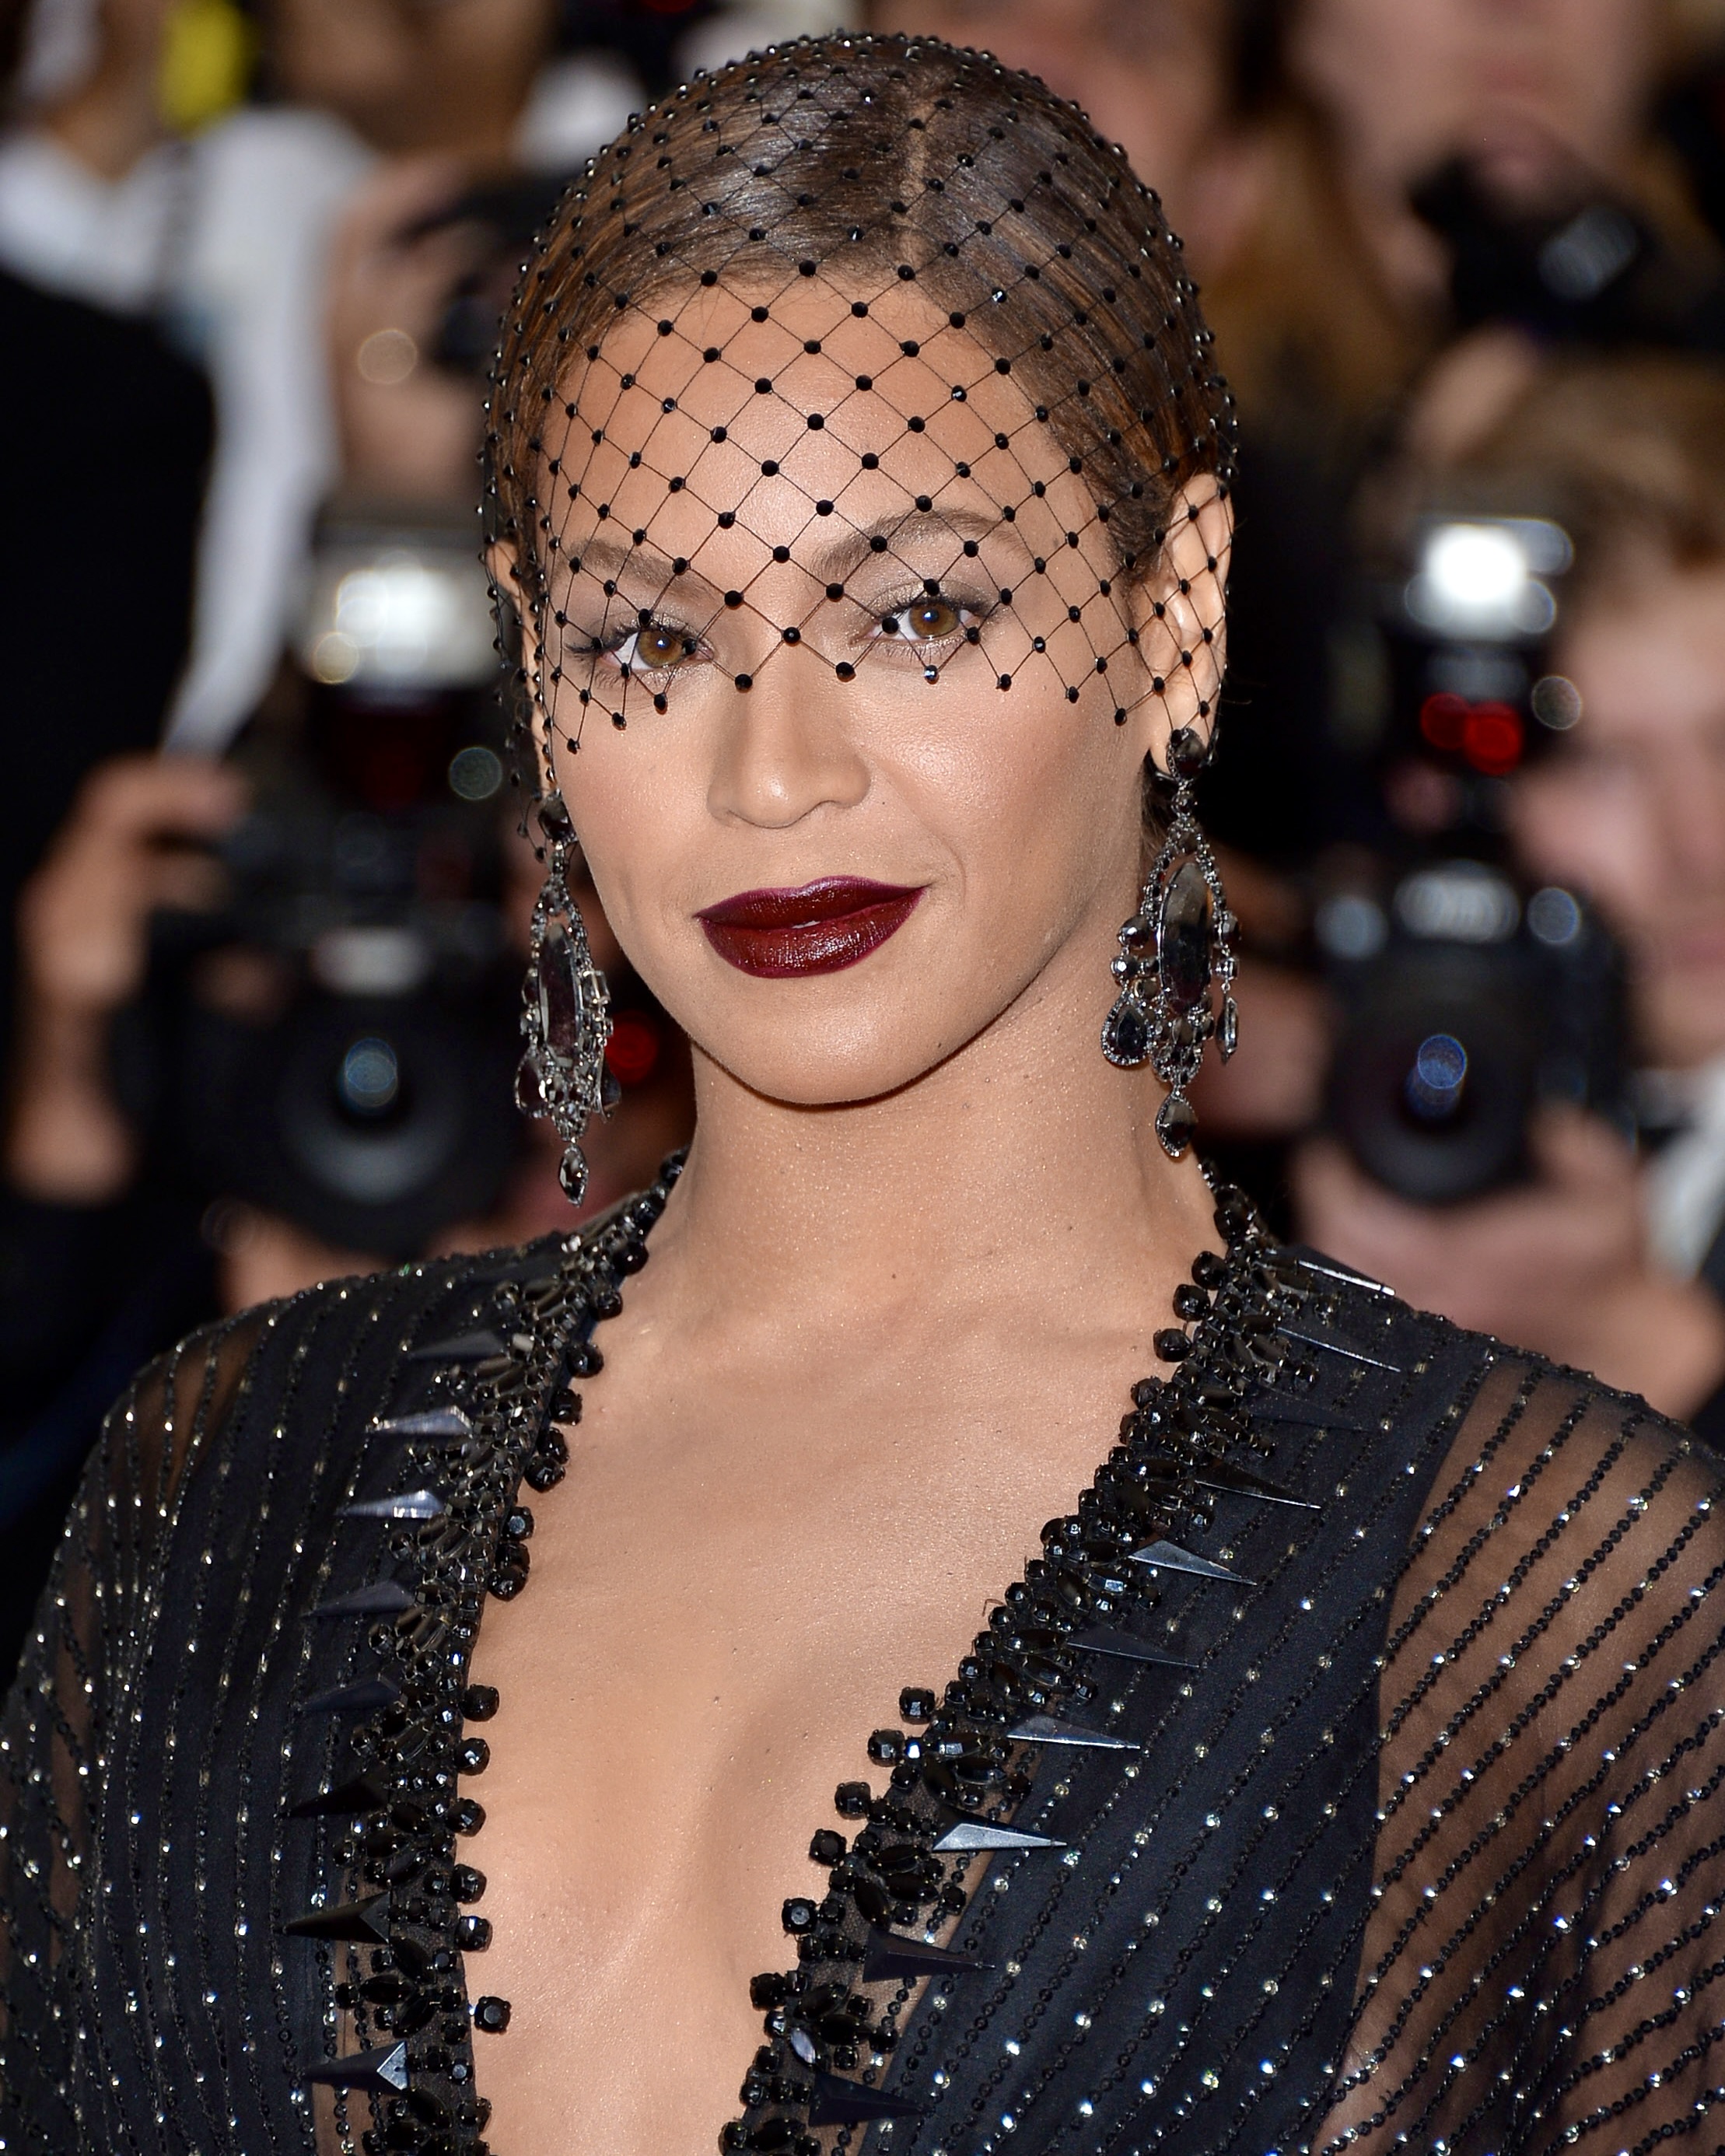 Beyoncé shined in natural diamond jewelry at the 2014 Met Gala.